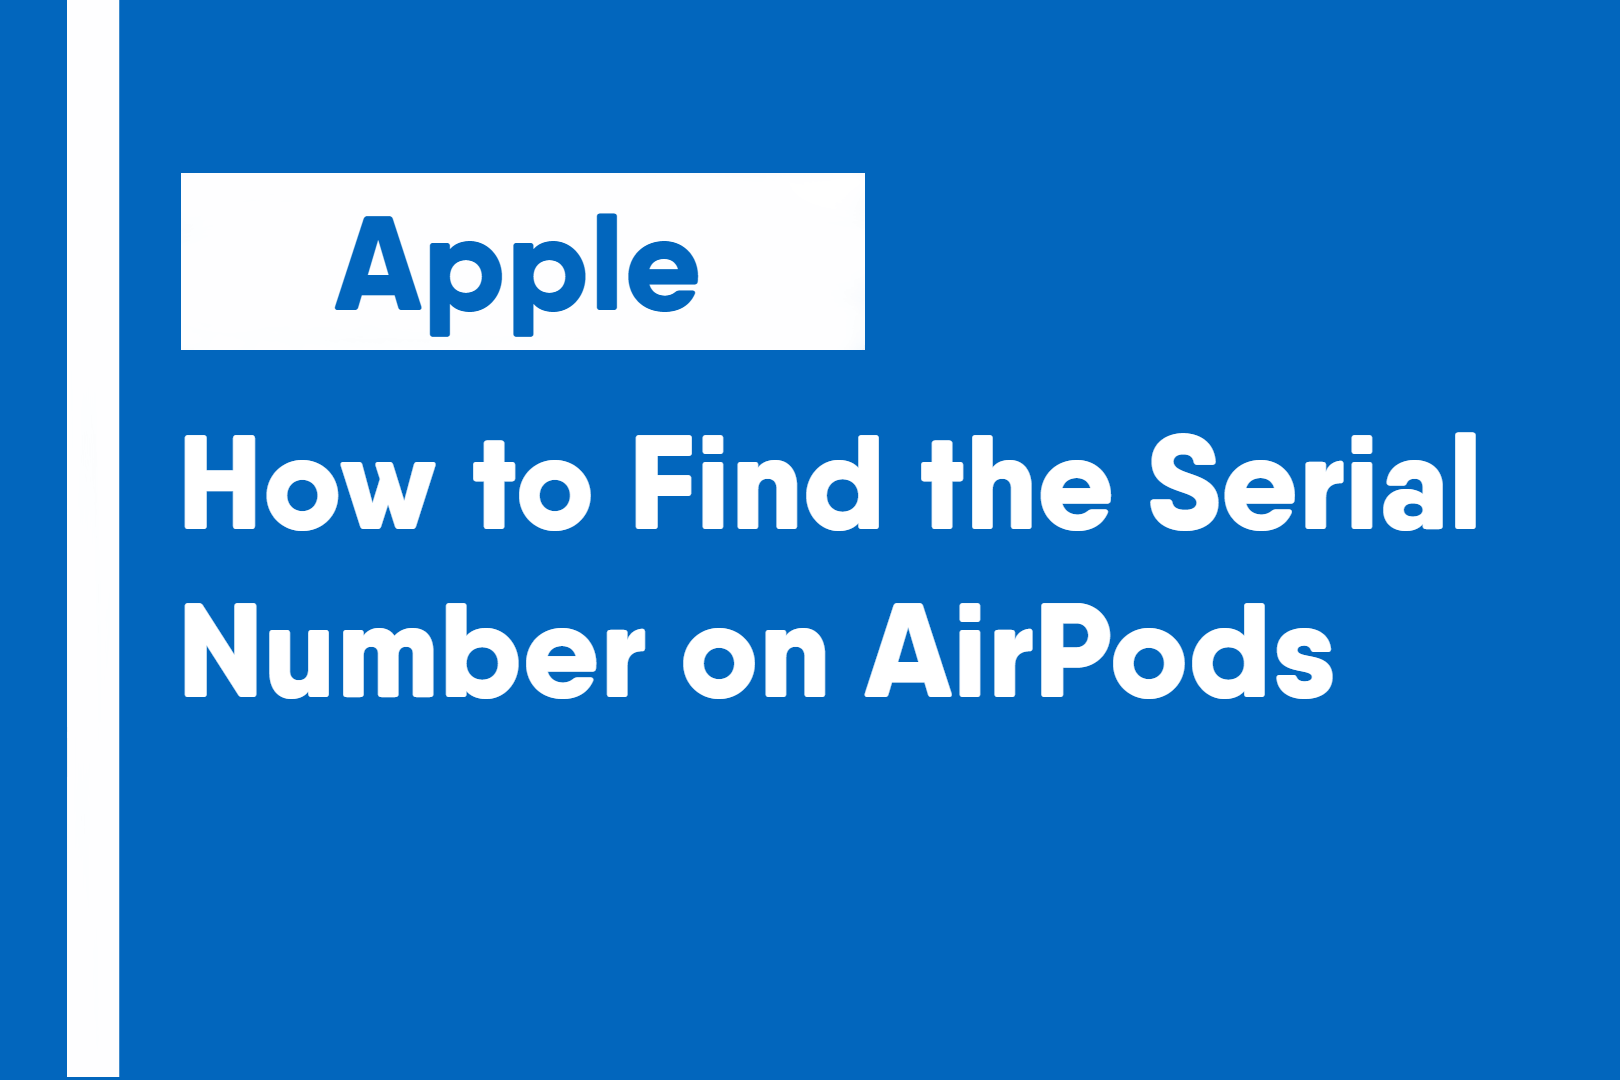 How to Find the Serial Number on AirPods